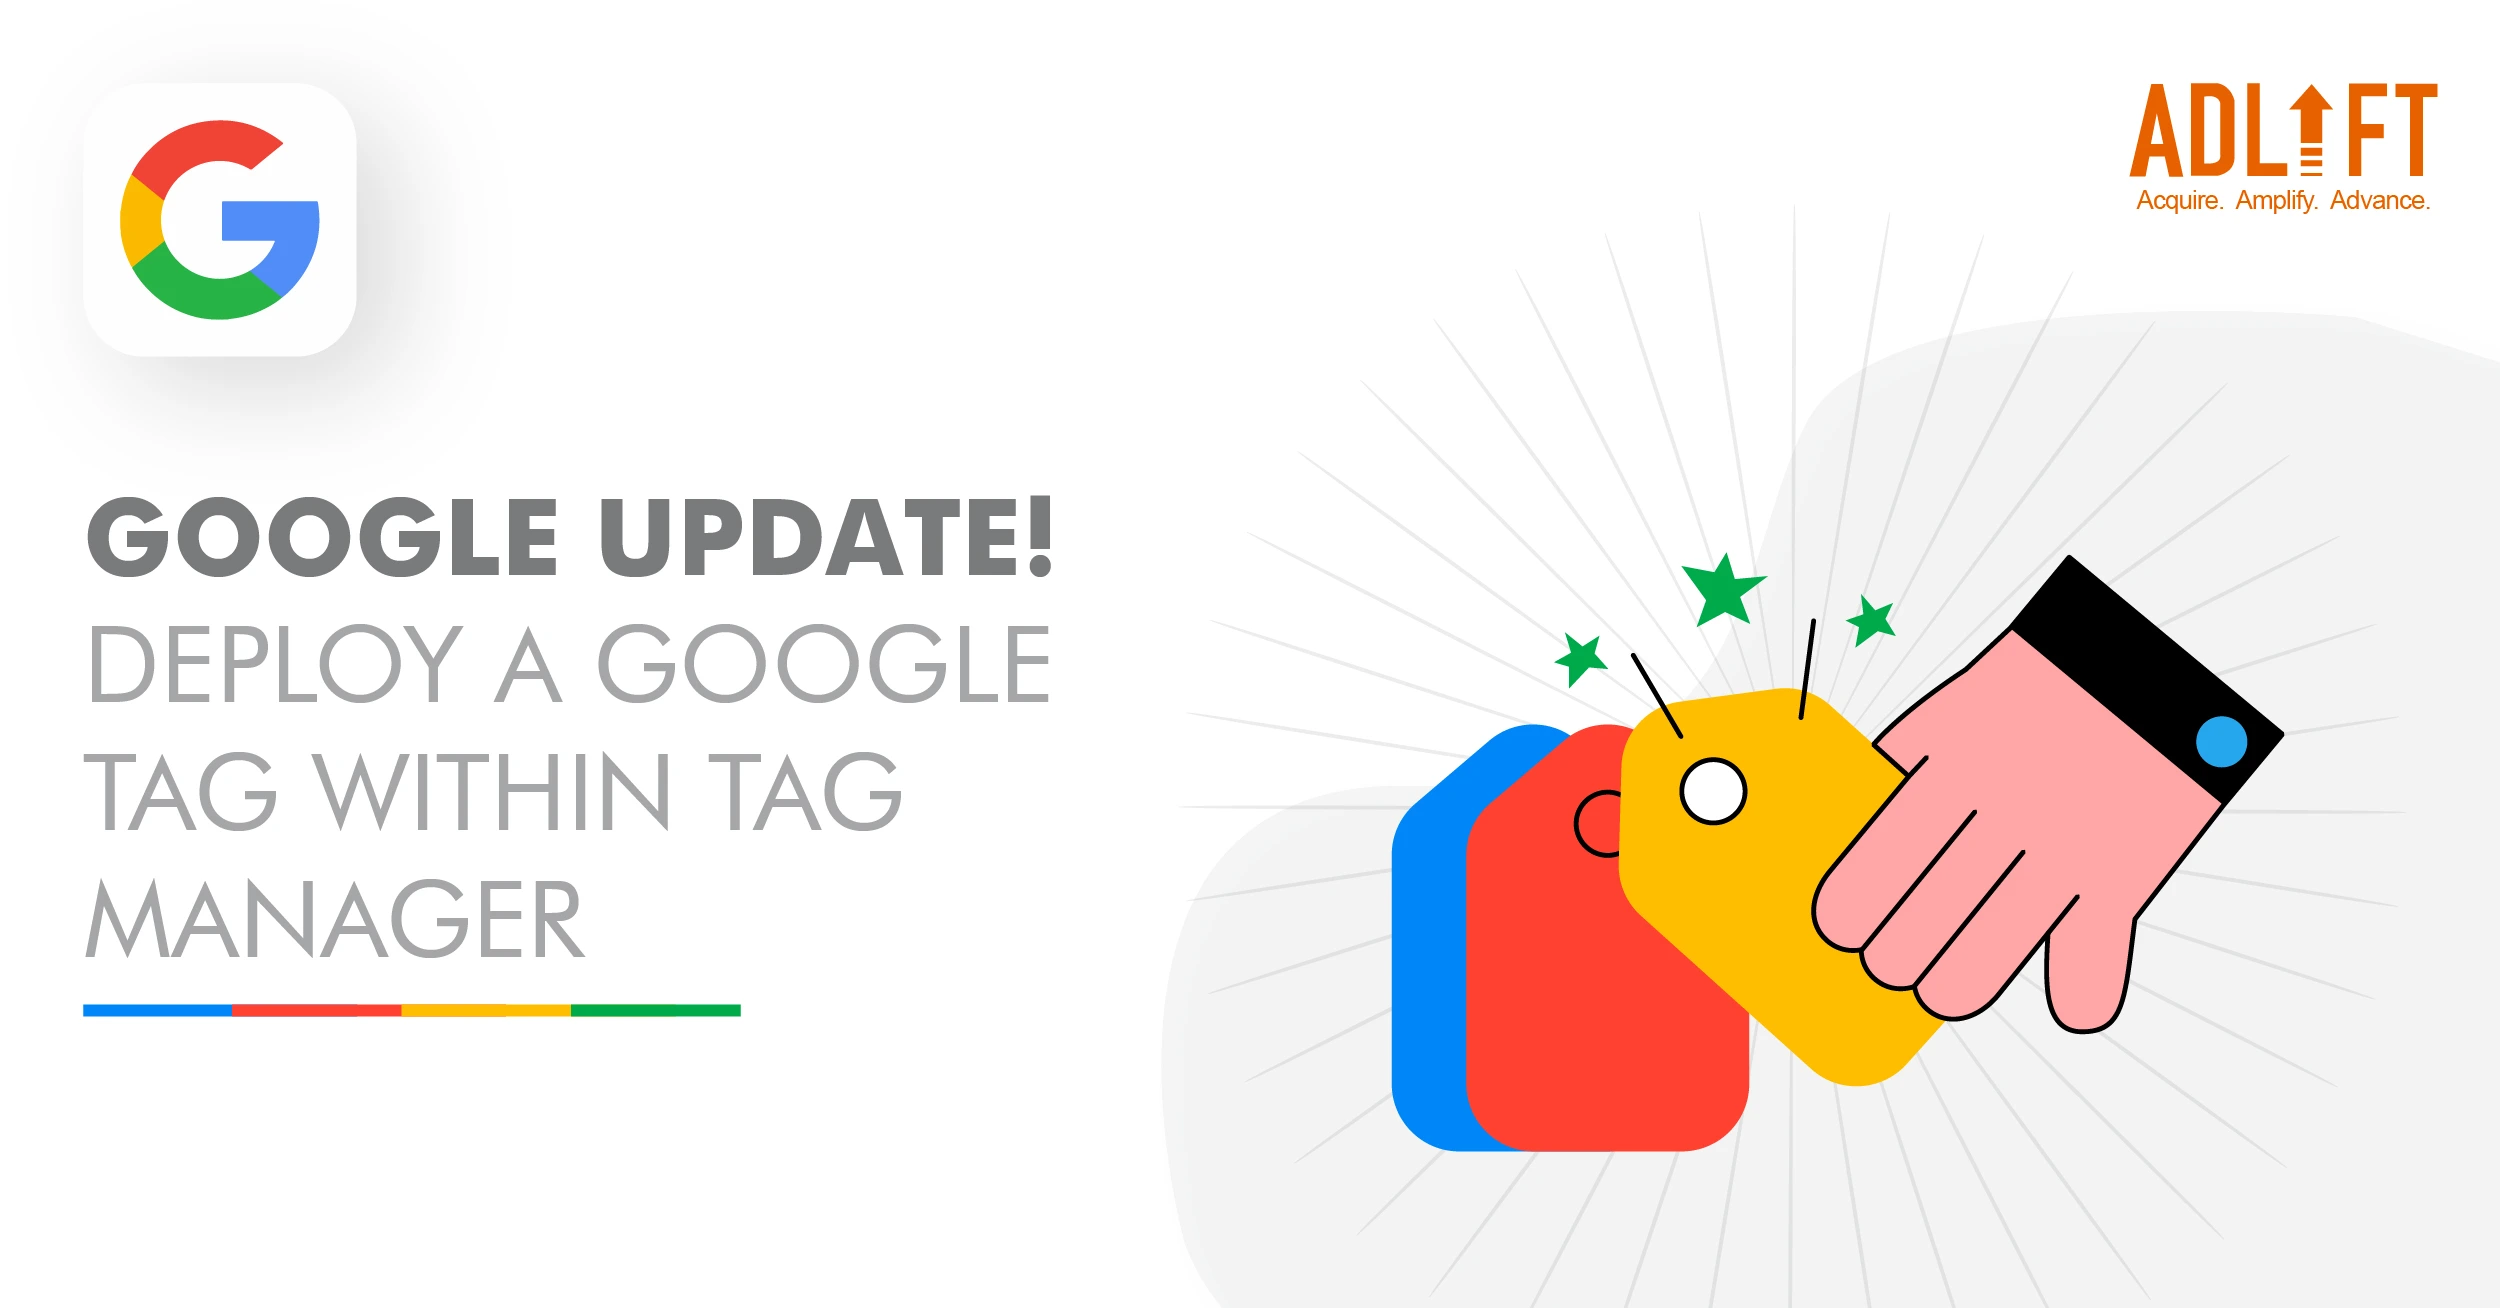 Google Update! Deploy a Google Tag within Tag Manager